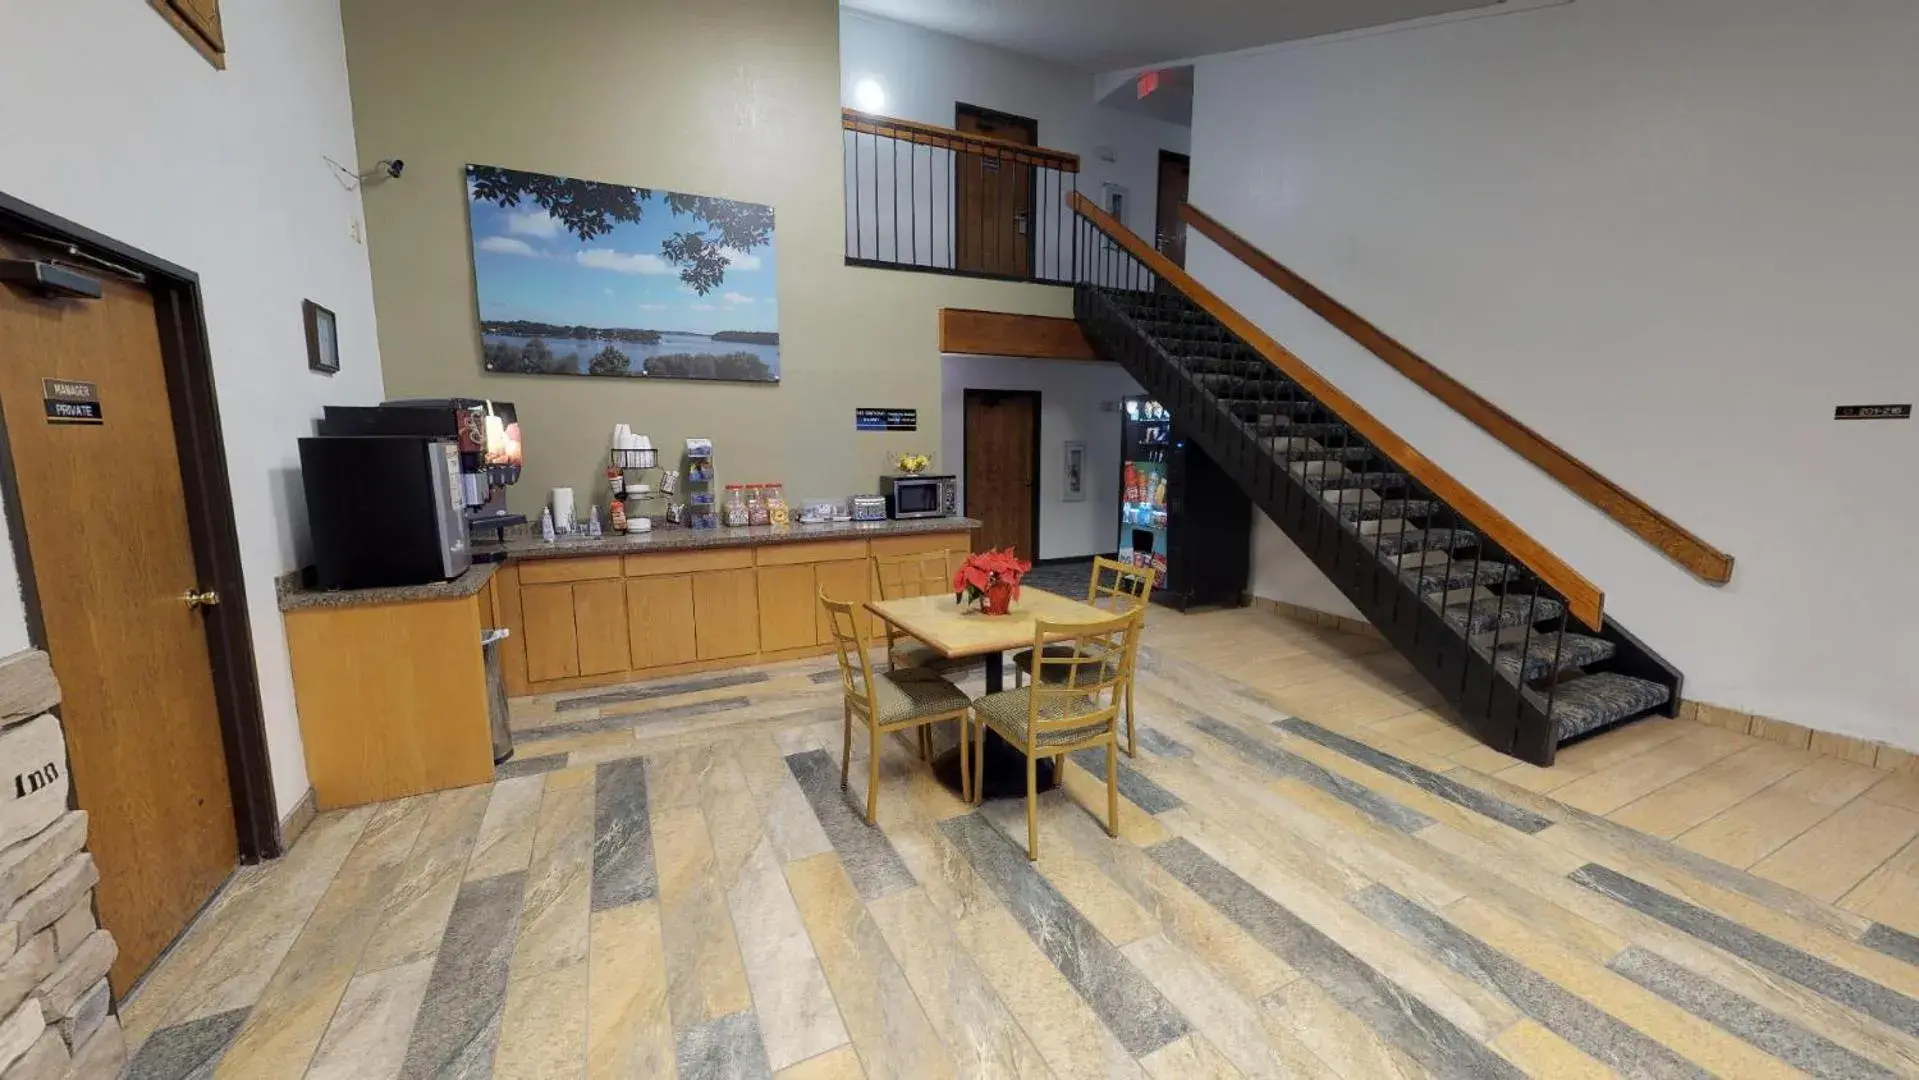 Lobby or reception in Waconia Inn and Suites